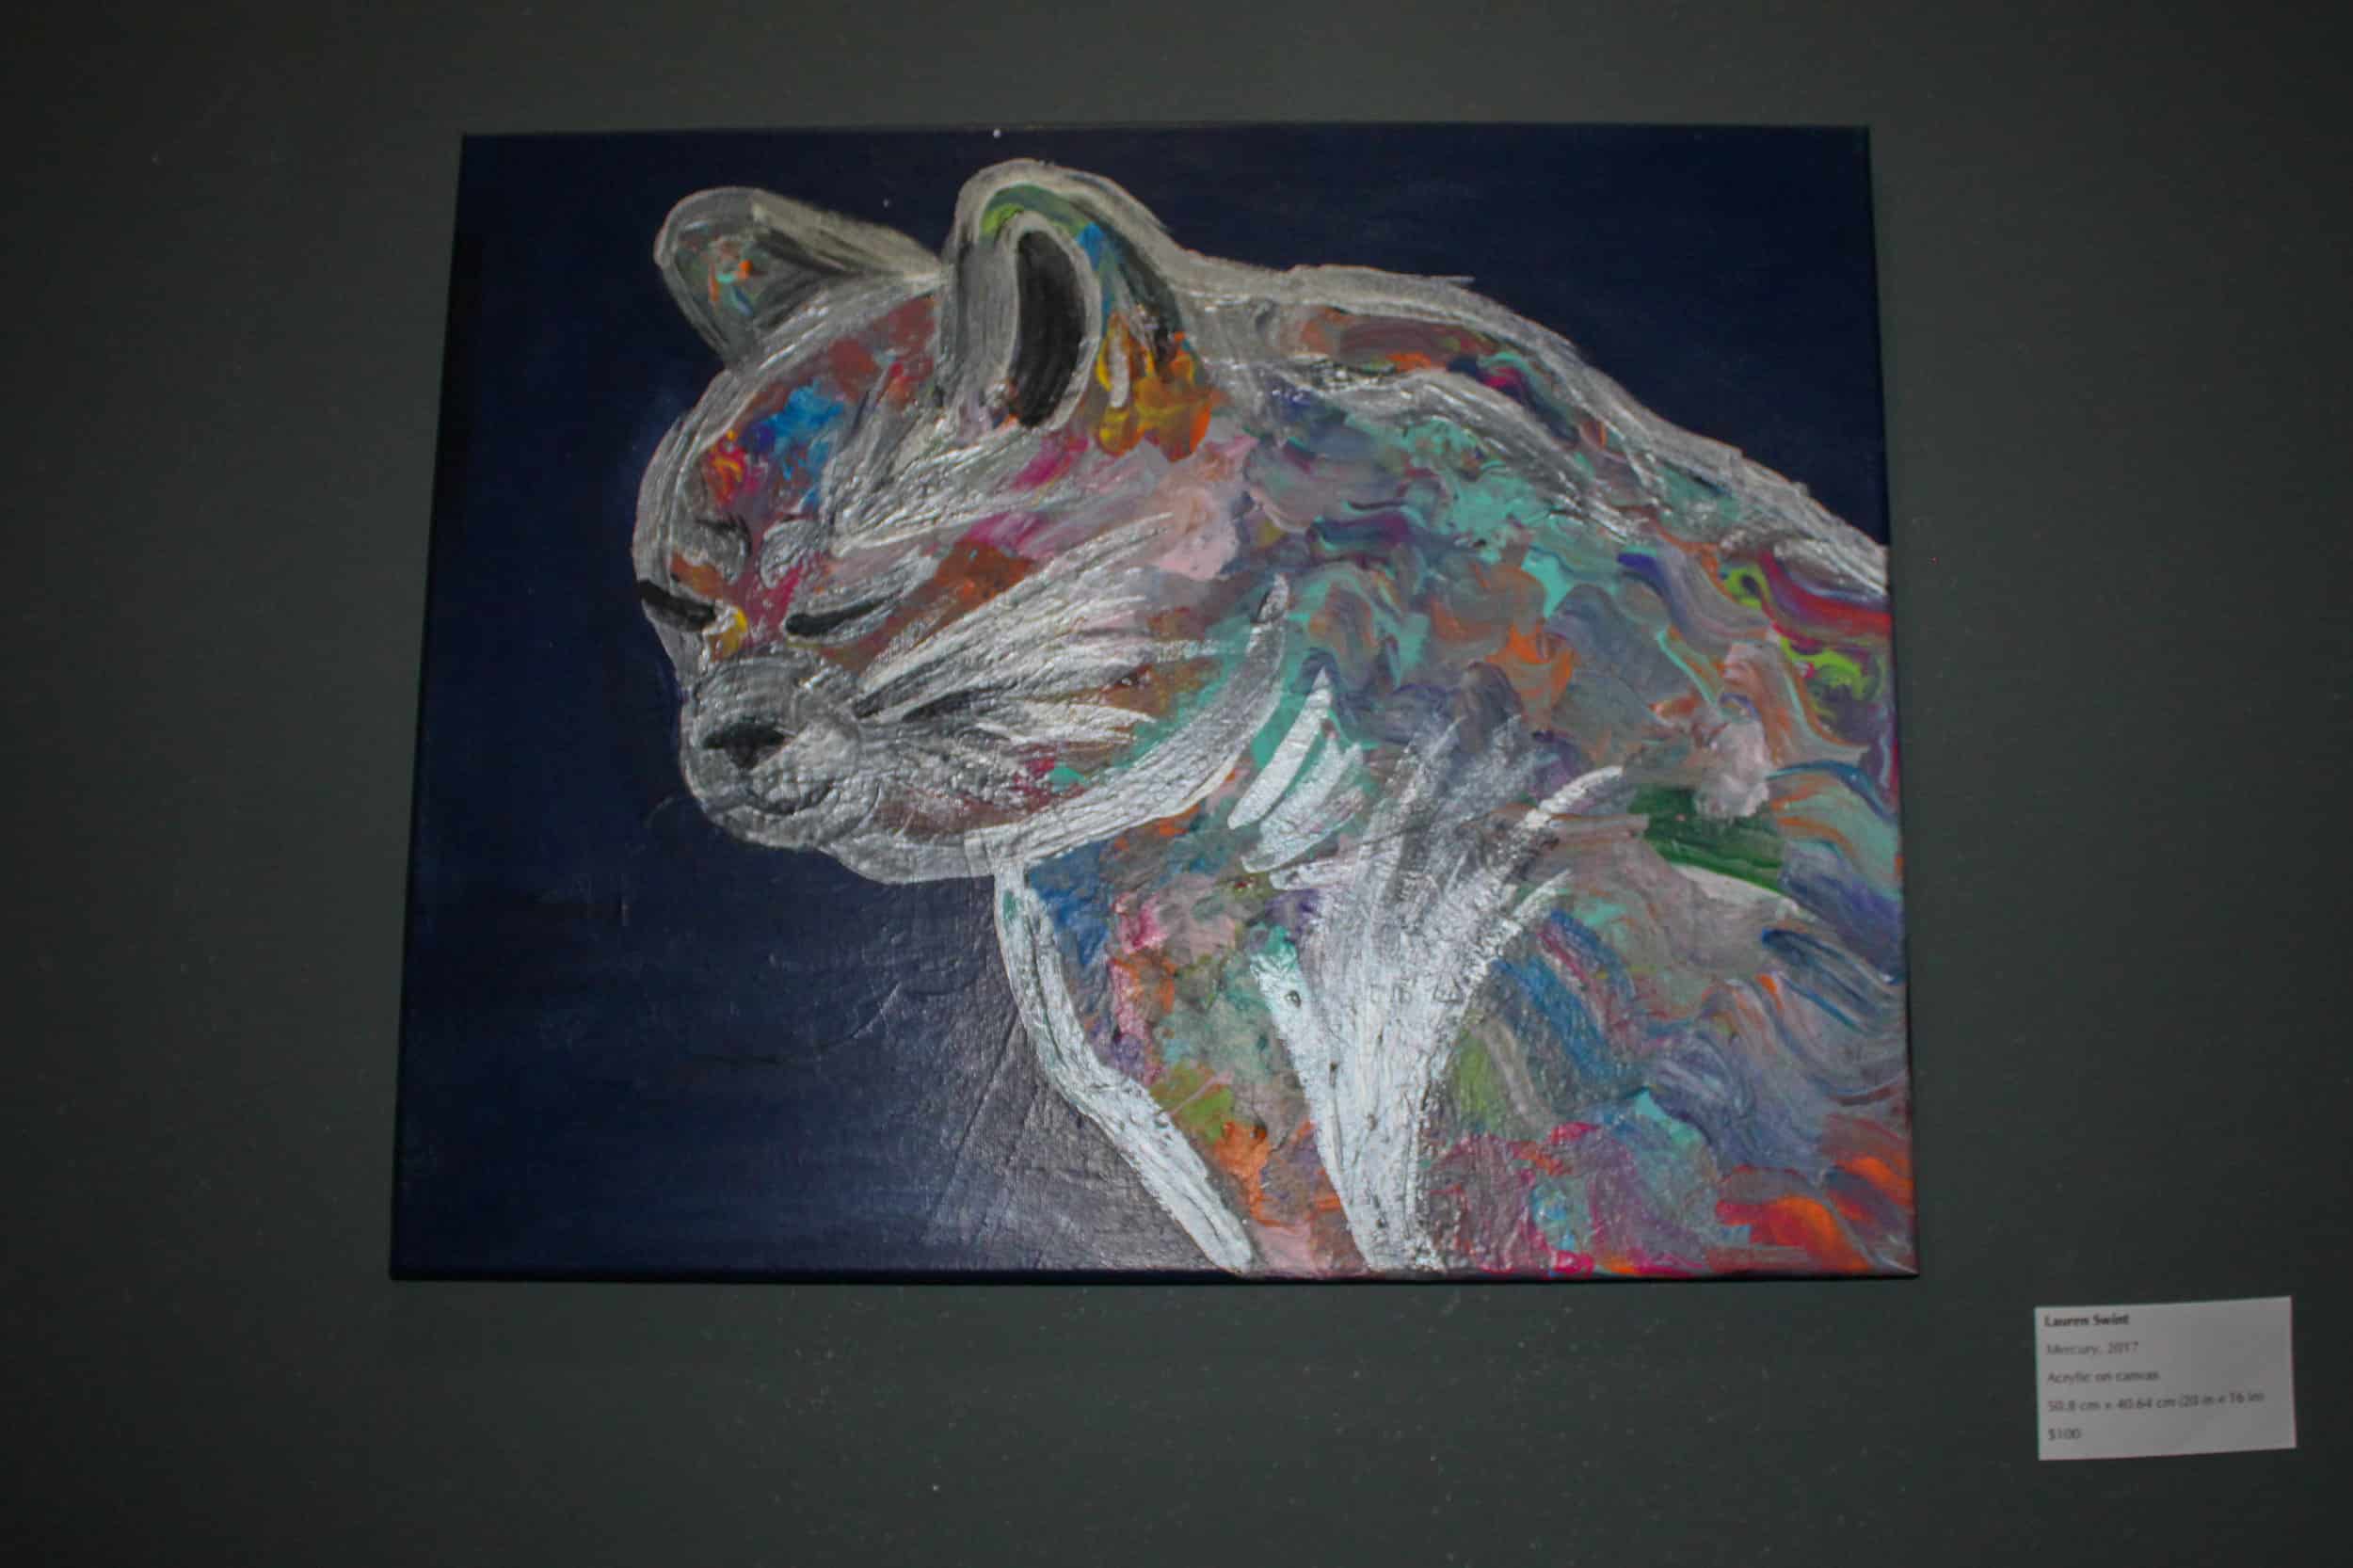 Featured throughout the cafe are portraits of cats made by local artists.